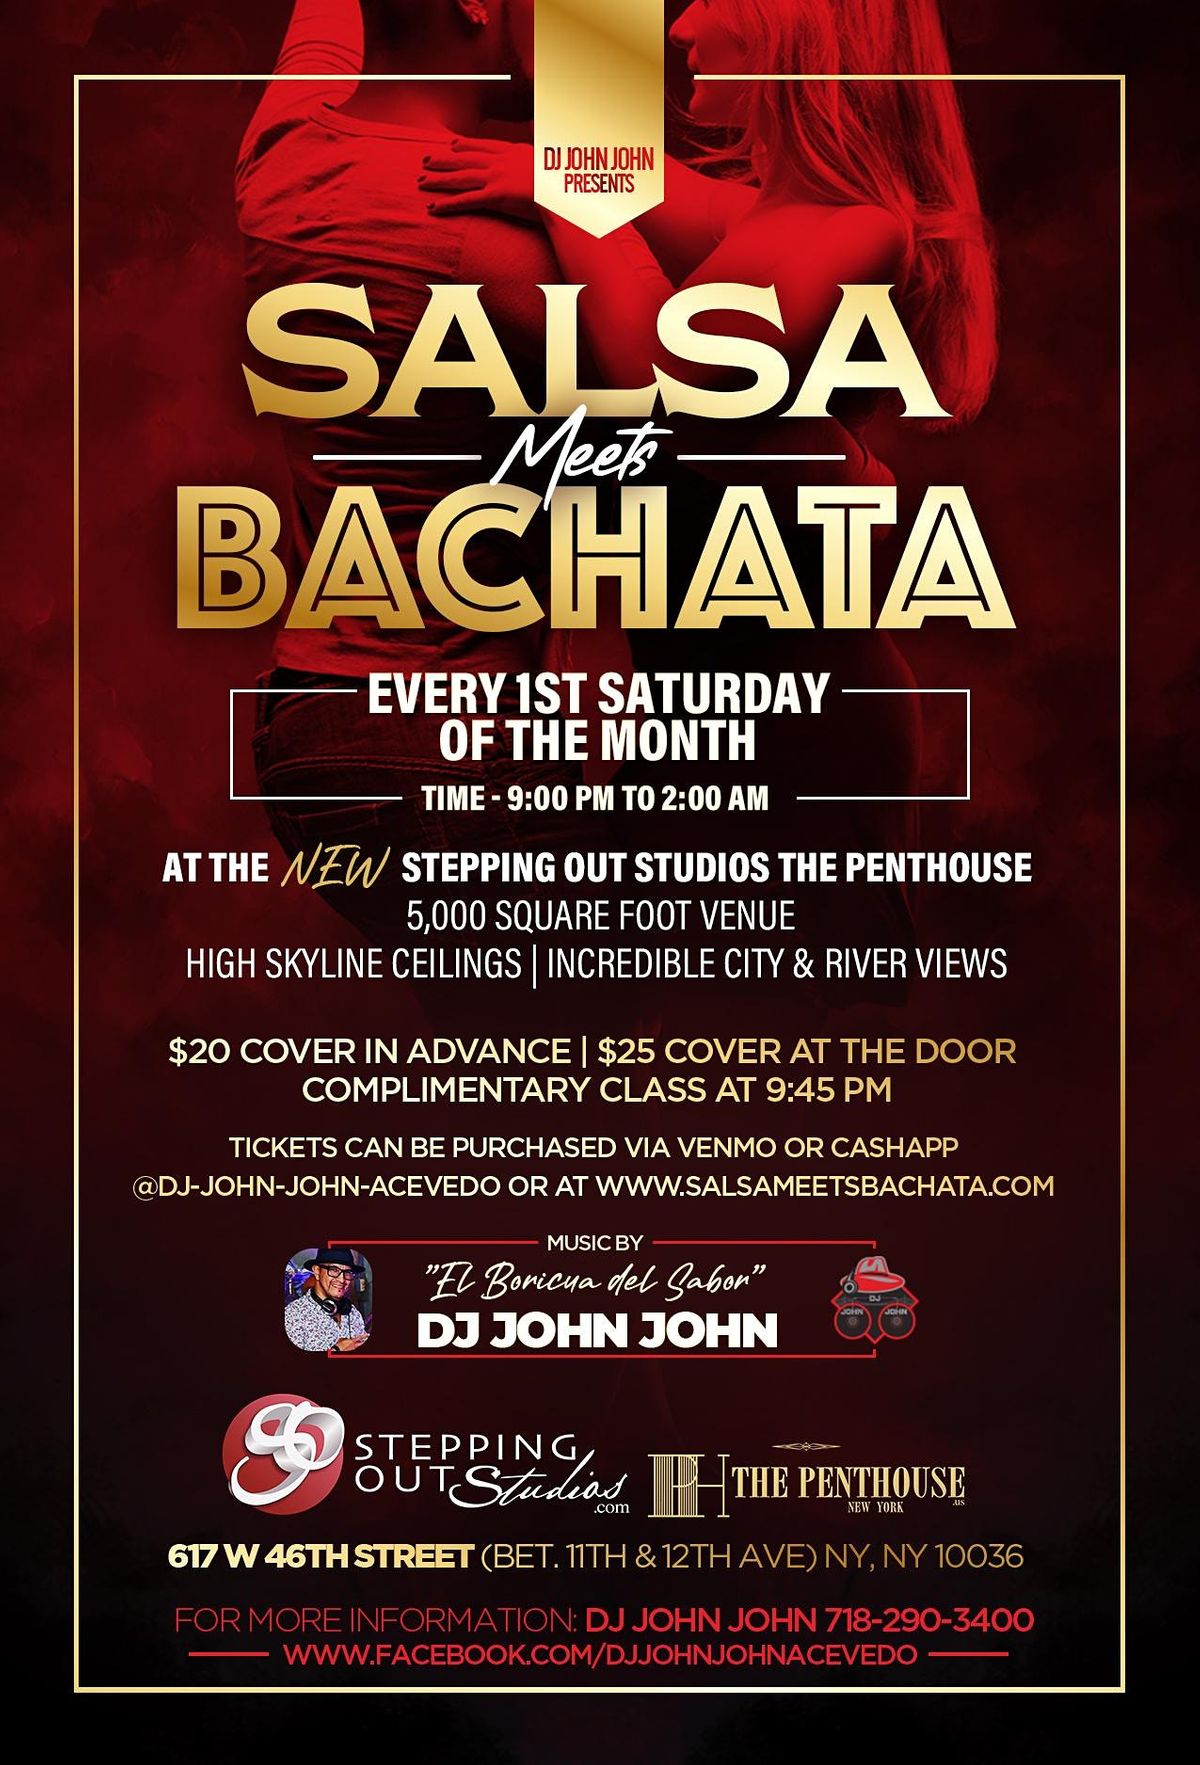 SALSA MEETS BACHATA at The Penthouse every 1st Saturday of the Month